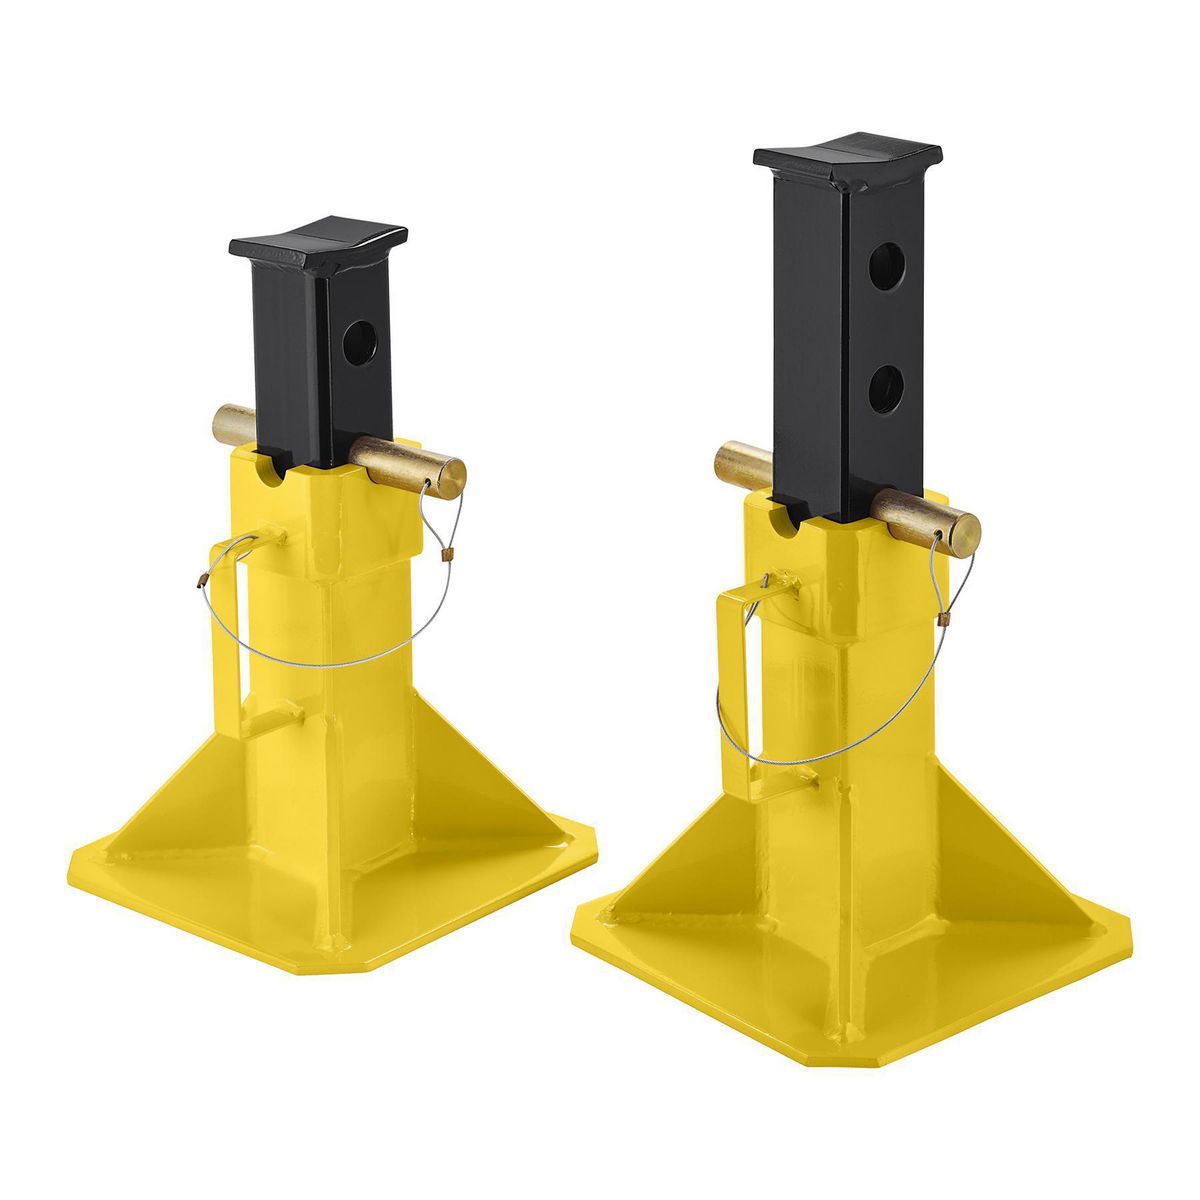 22 Ton Heavy Duty Jack Stands with Locking Pin, Yellow